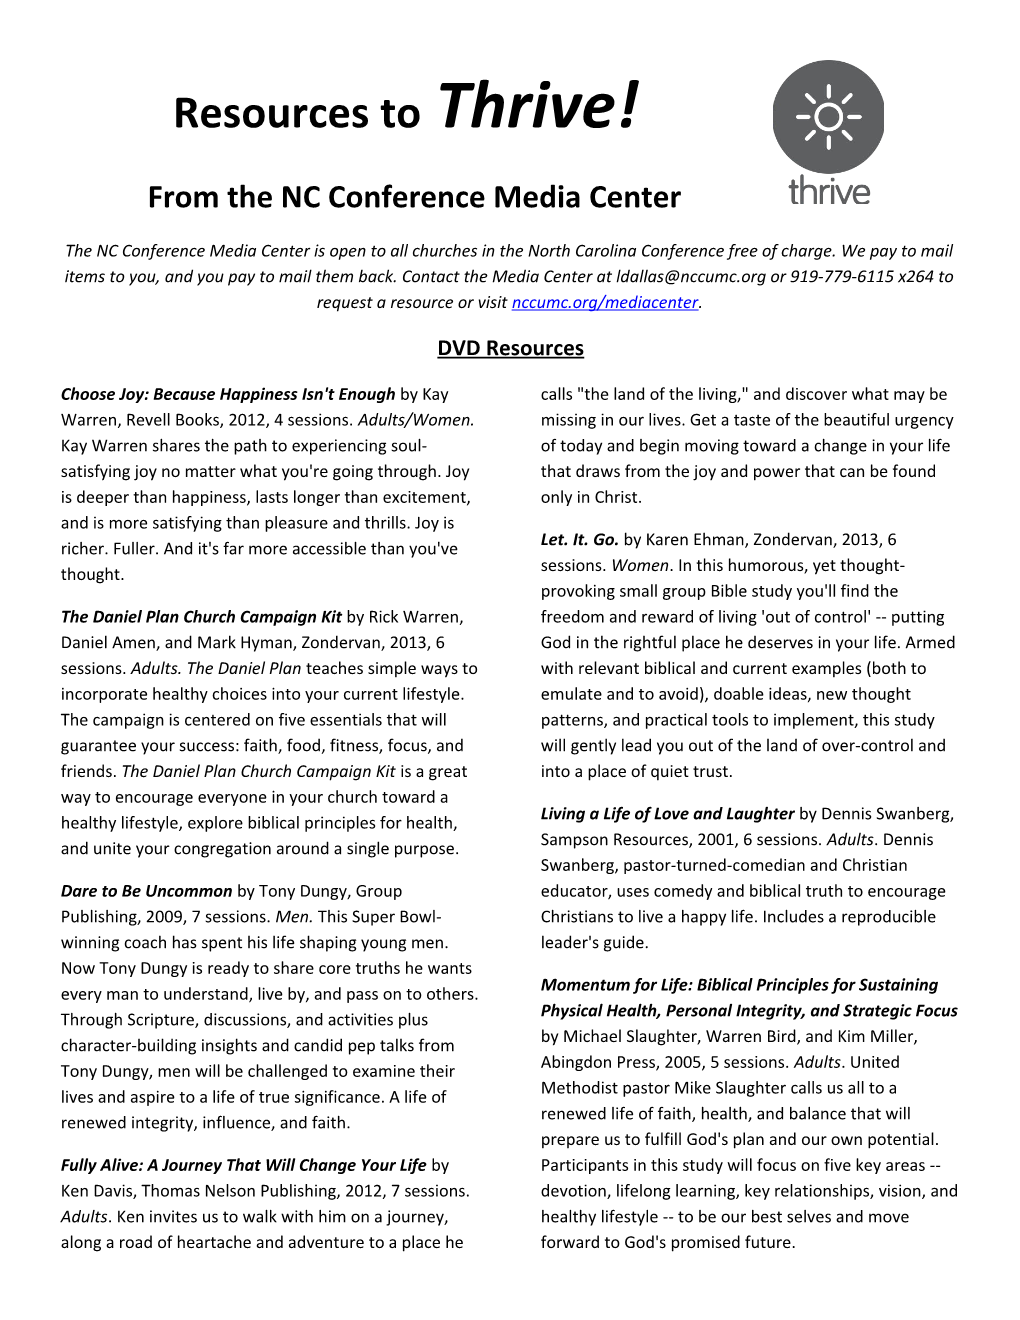 From the NC Conference Media Center